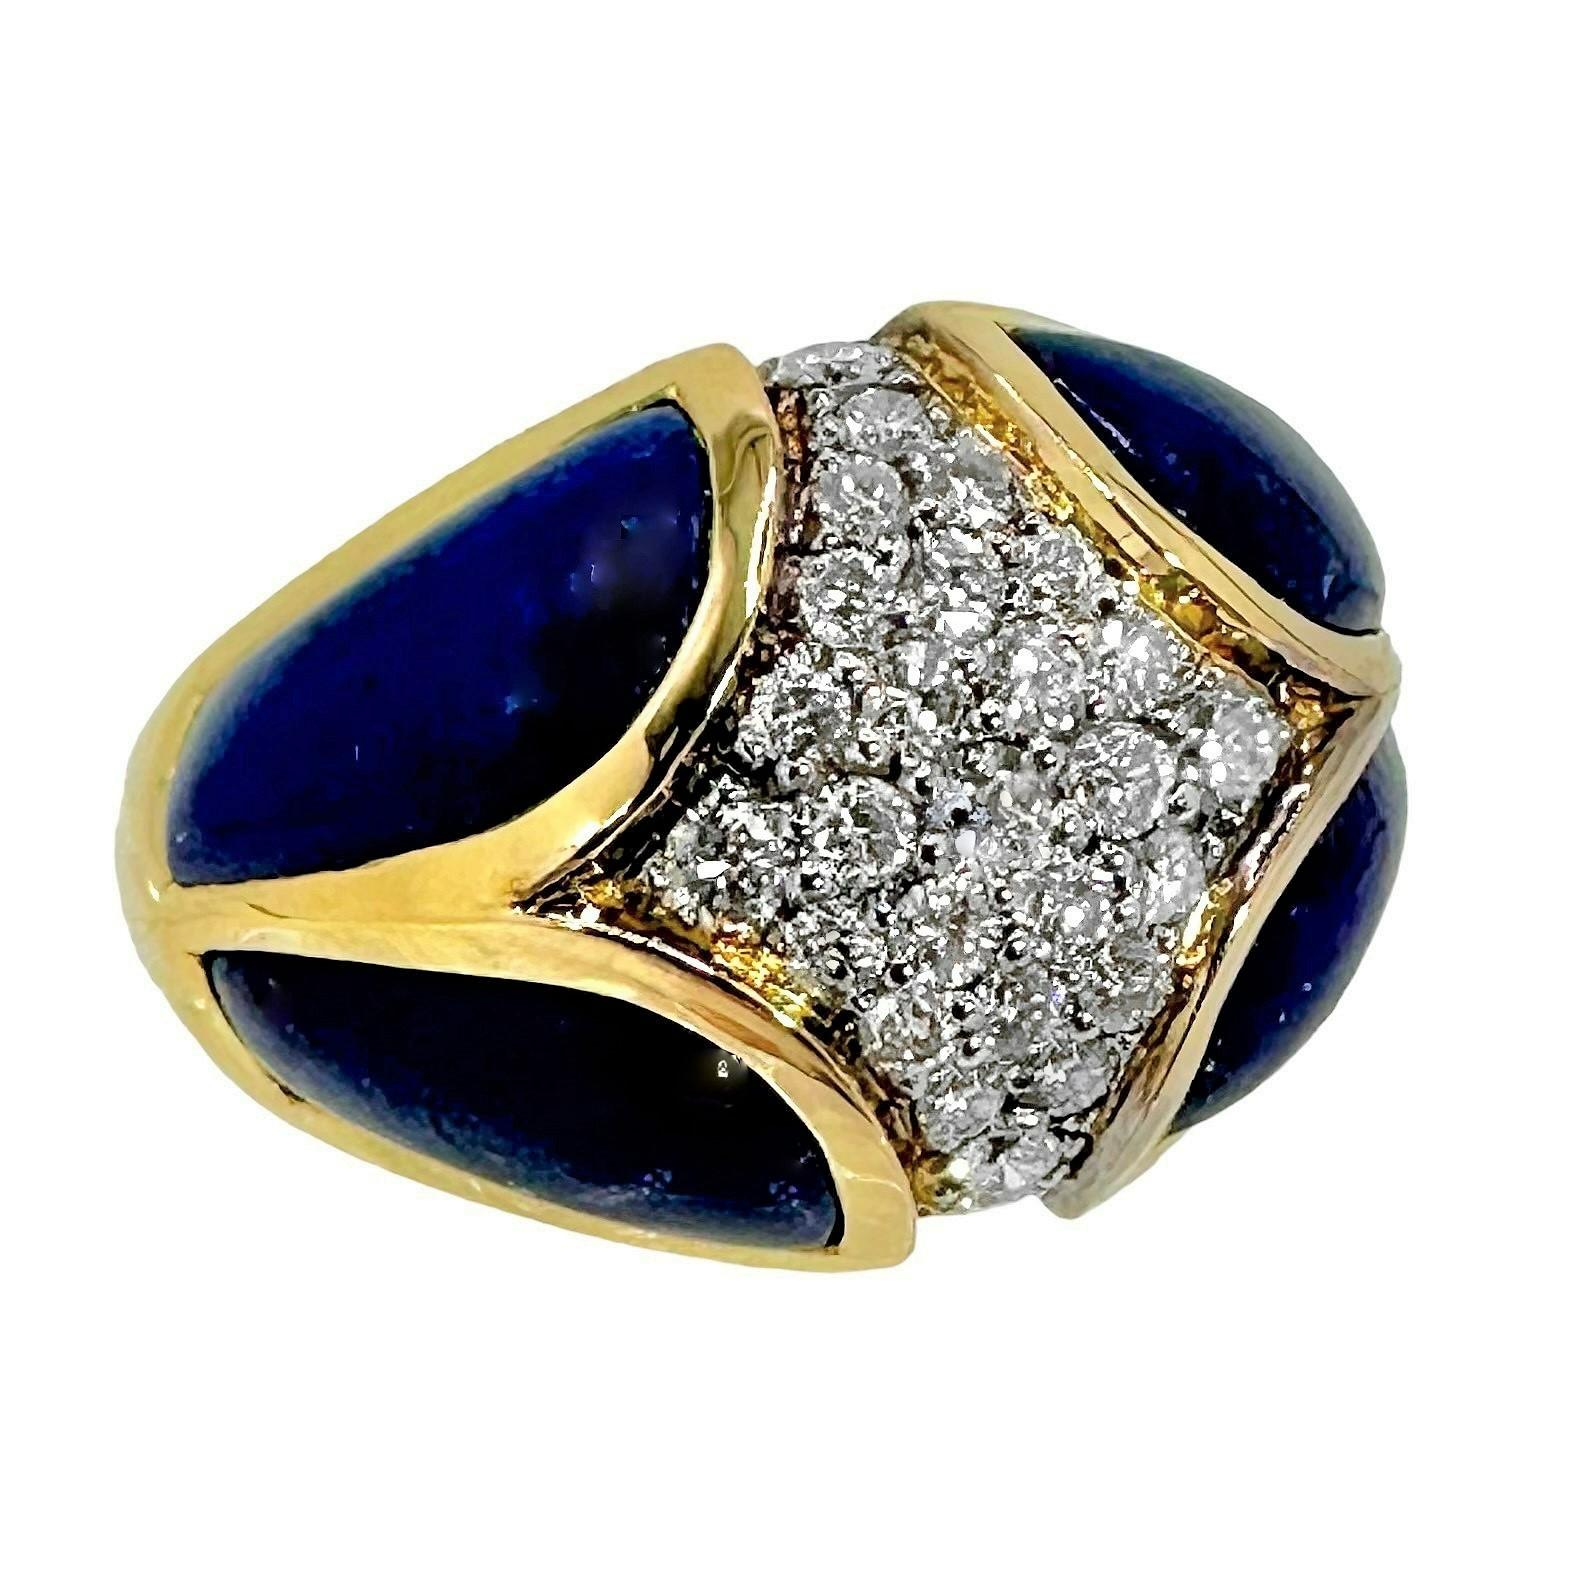 This very interesting and tailored ladies fashion ring was created at some time during the 1970's. It is constructed with the finest materials and with much attention paid to detail. A center white gold, heavily diamond encrusted dome is cradled at